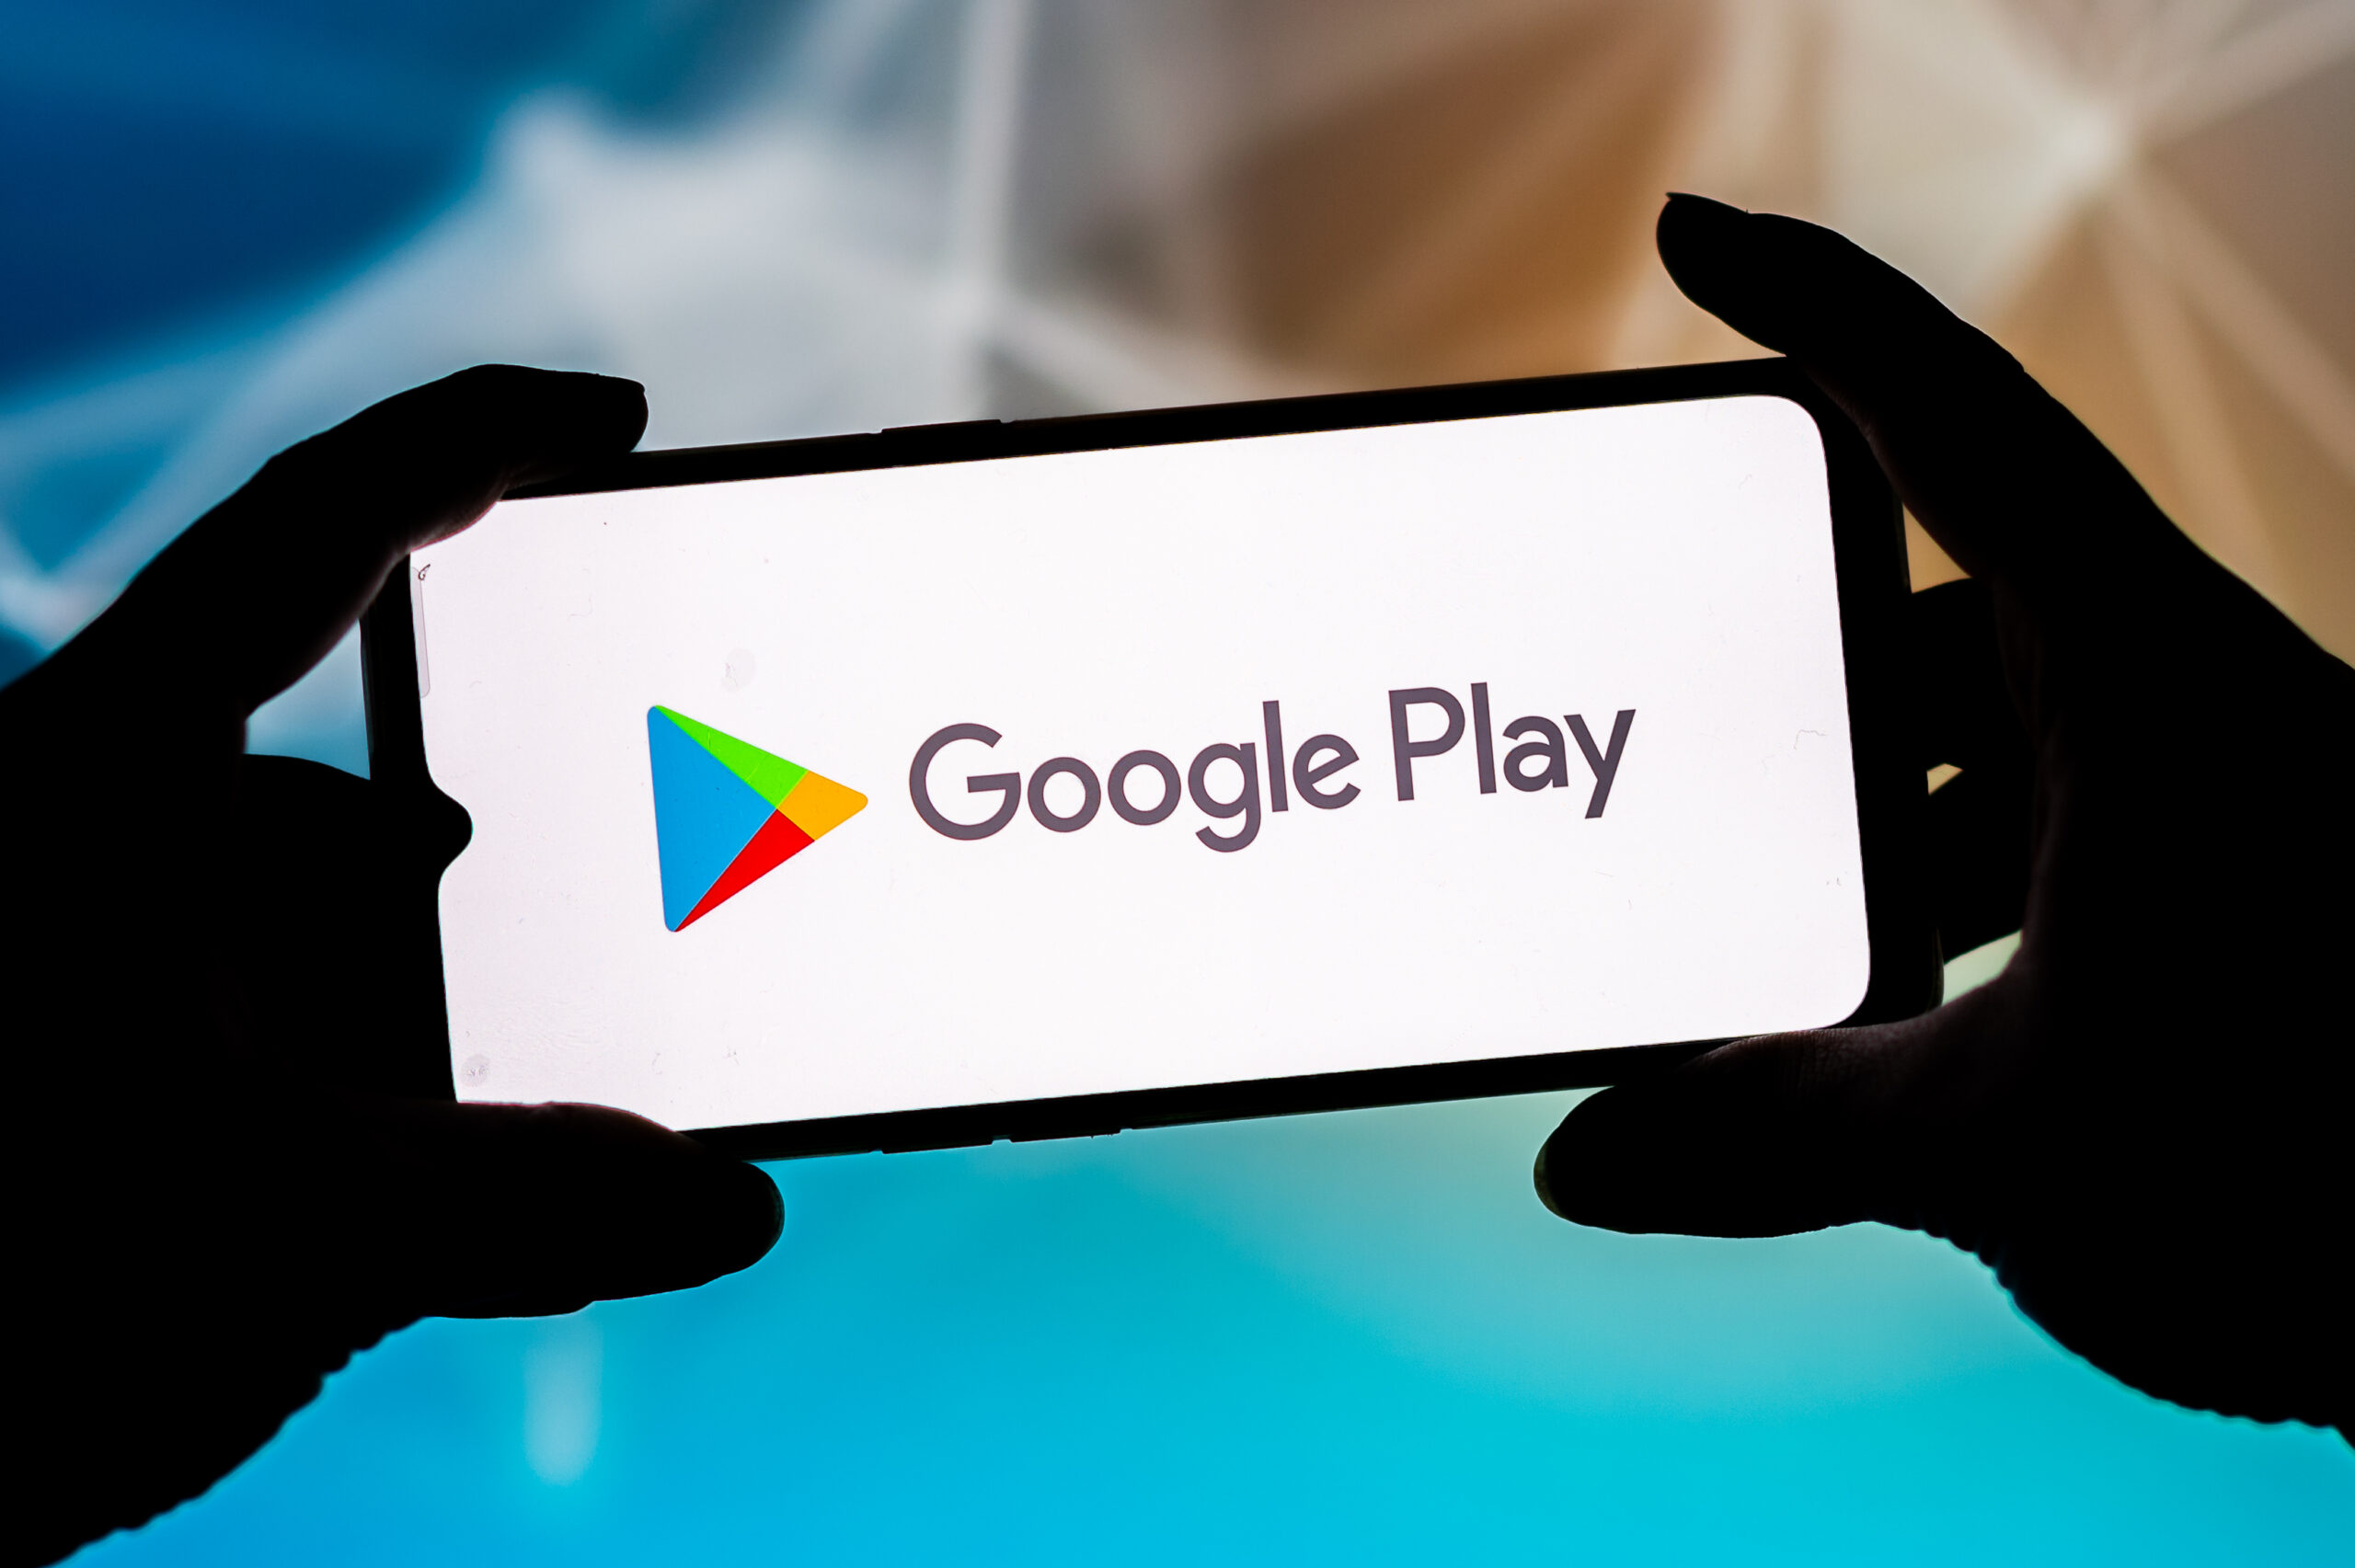 Cut Down All - Apps on Google Play